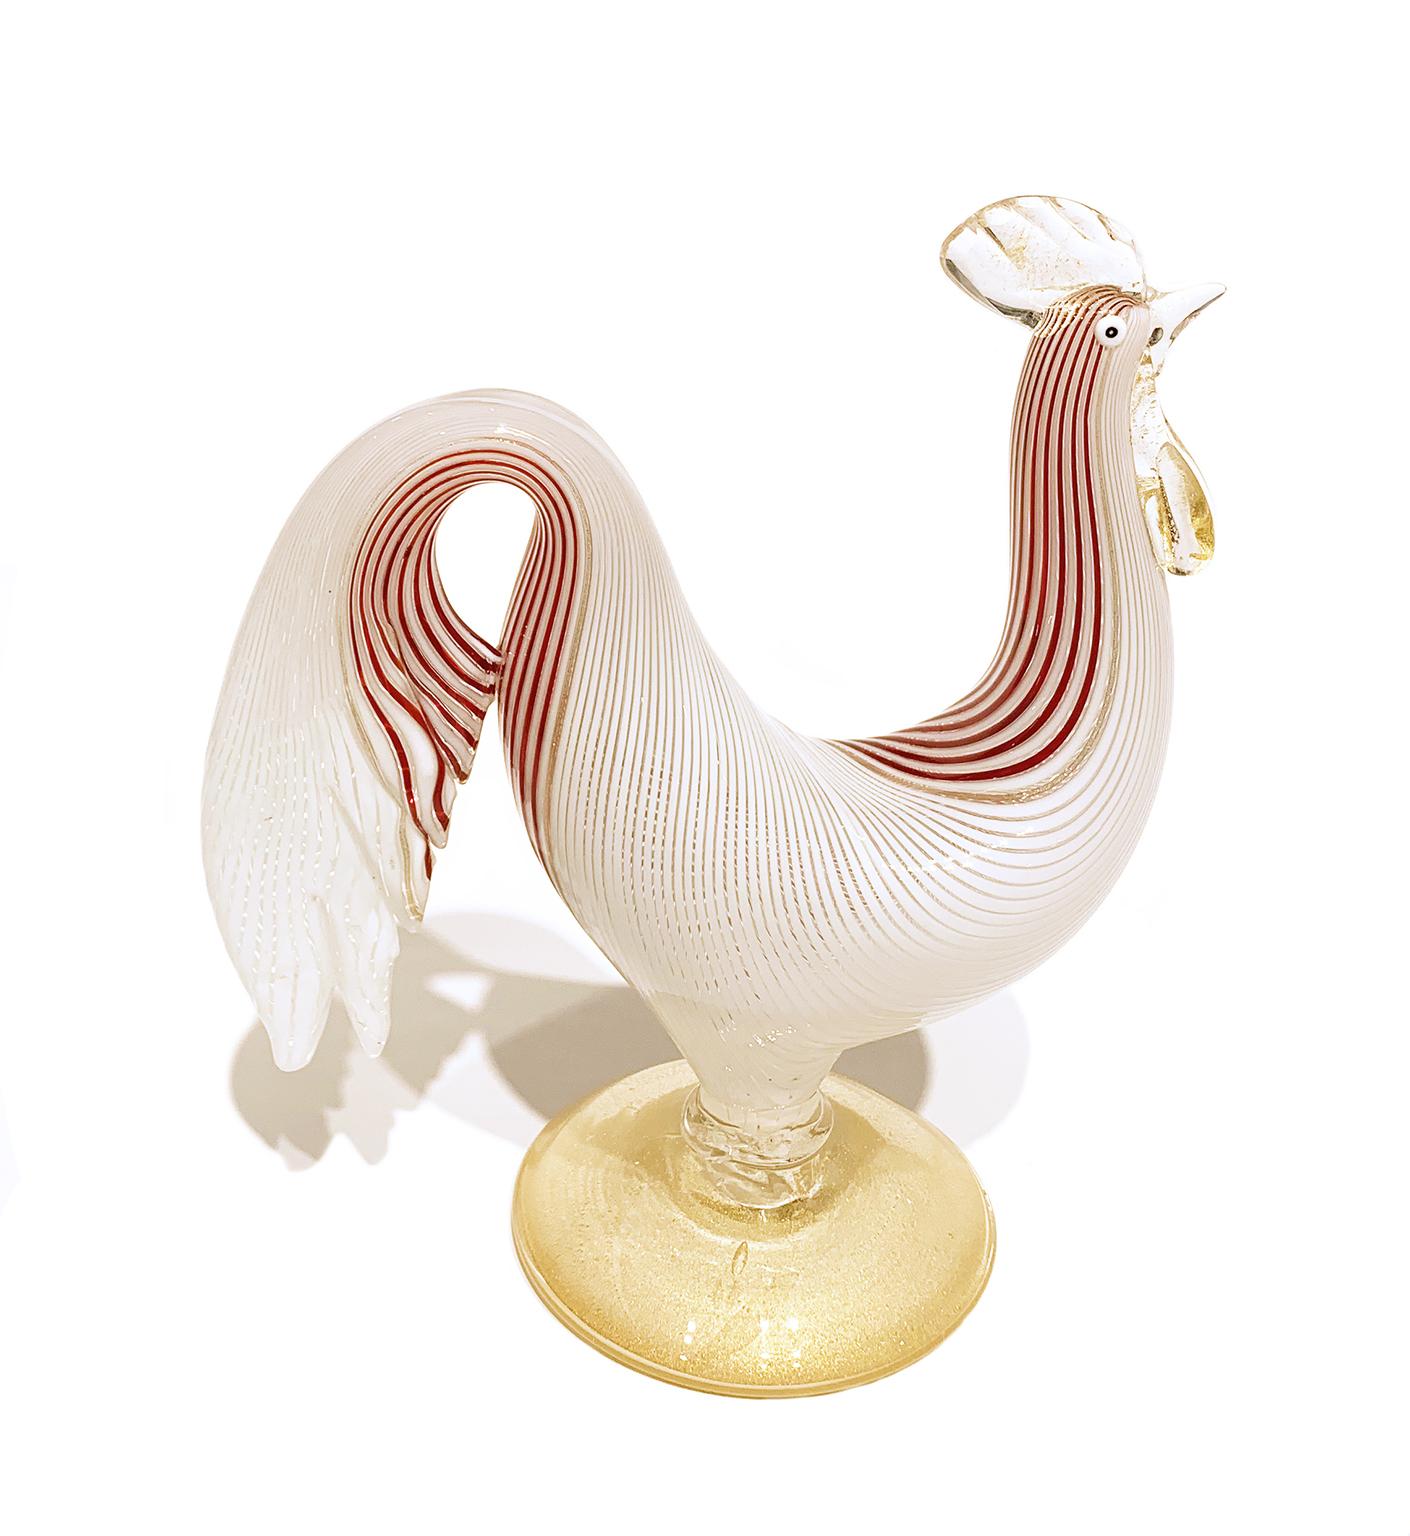 Modern Murano Glass Rooster-Shaped Sculpture, Dino Martens, Venice Aureliano Toso, 1954 For Sale